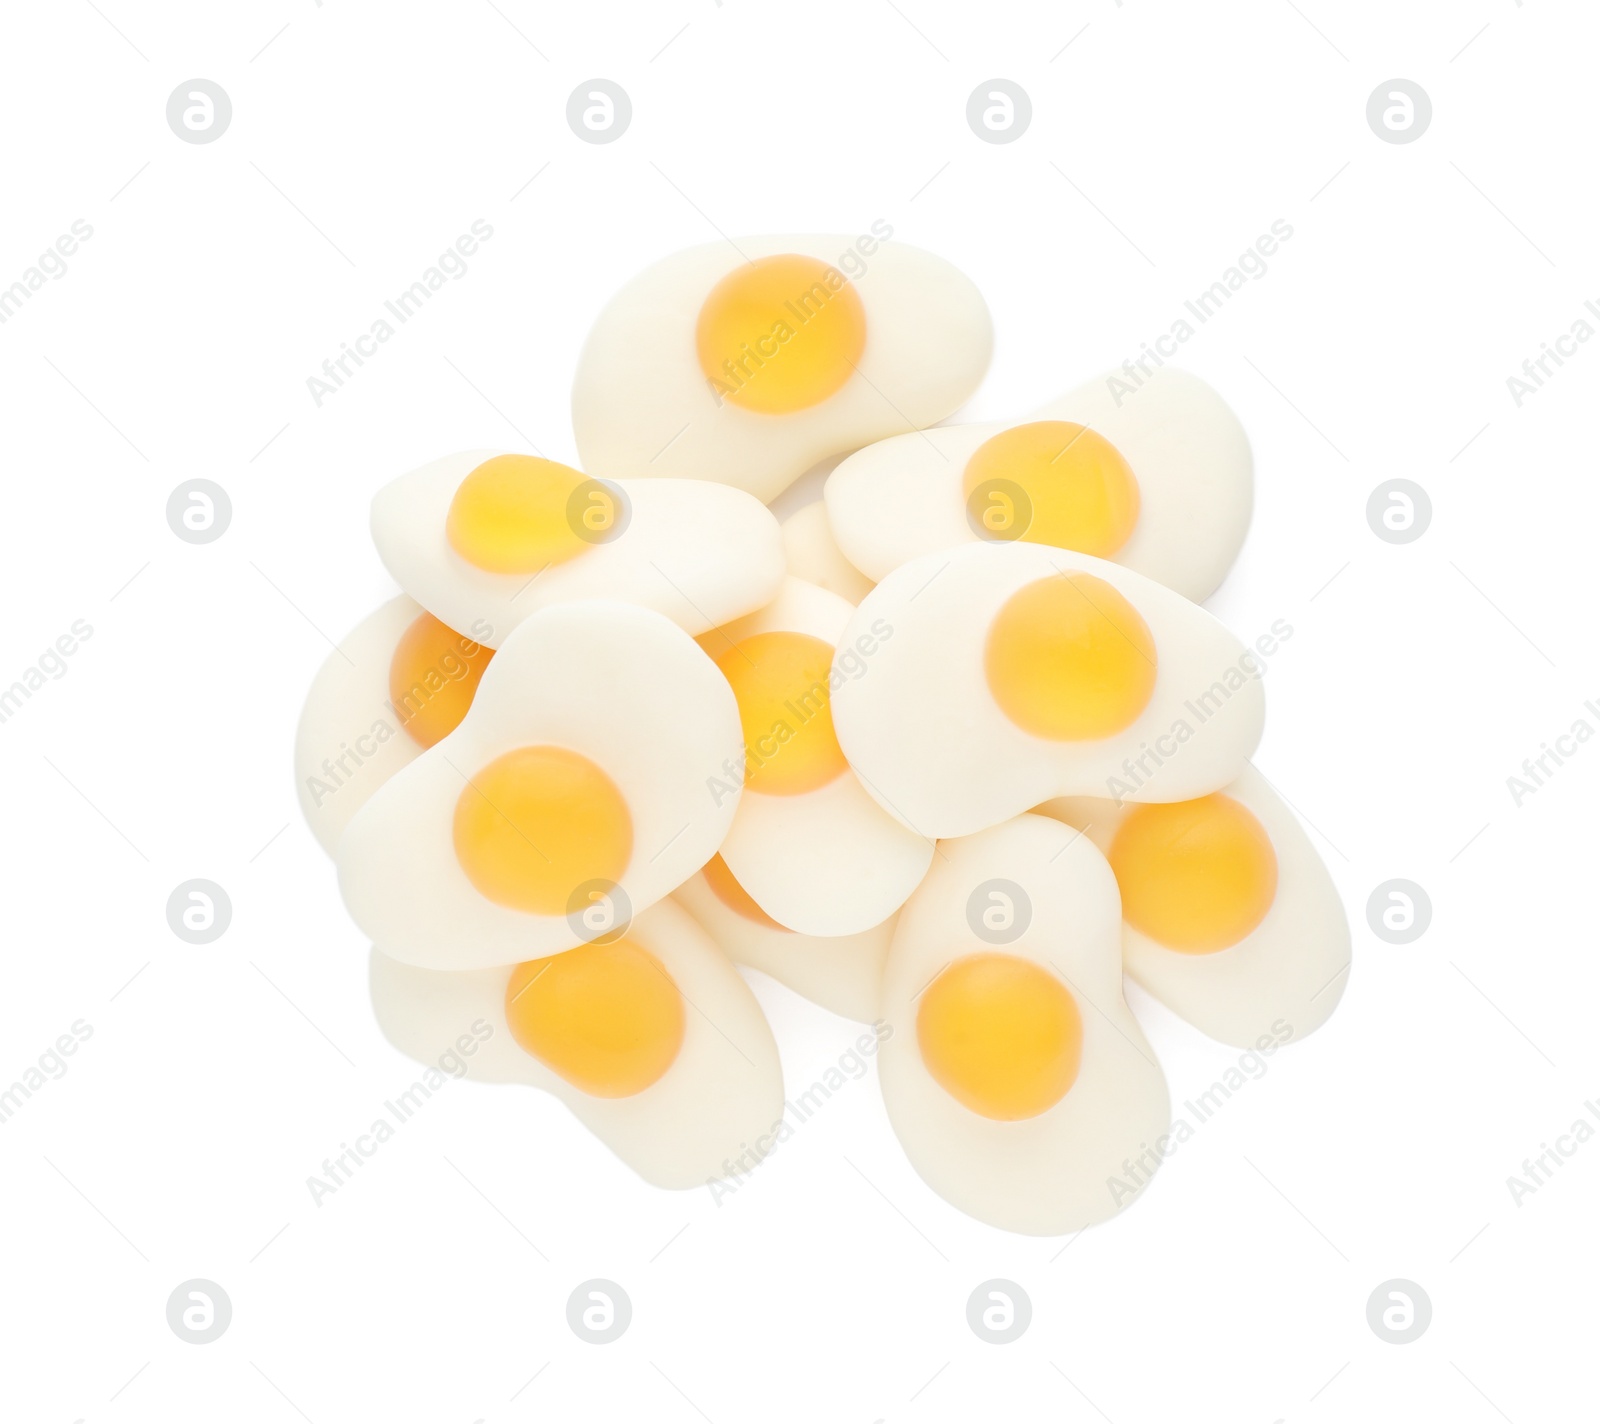 Photo of Pile with jelly candies in shape of egg on white background, top view